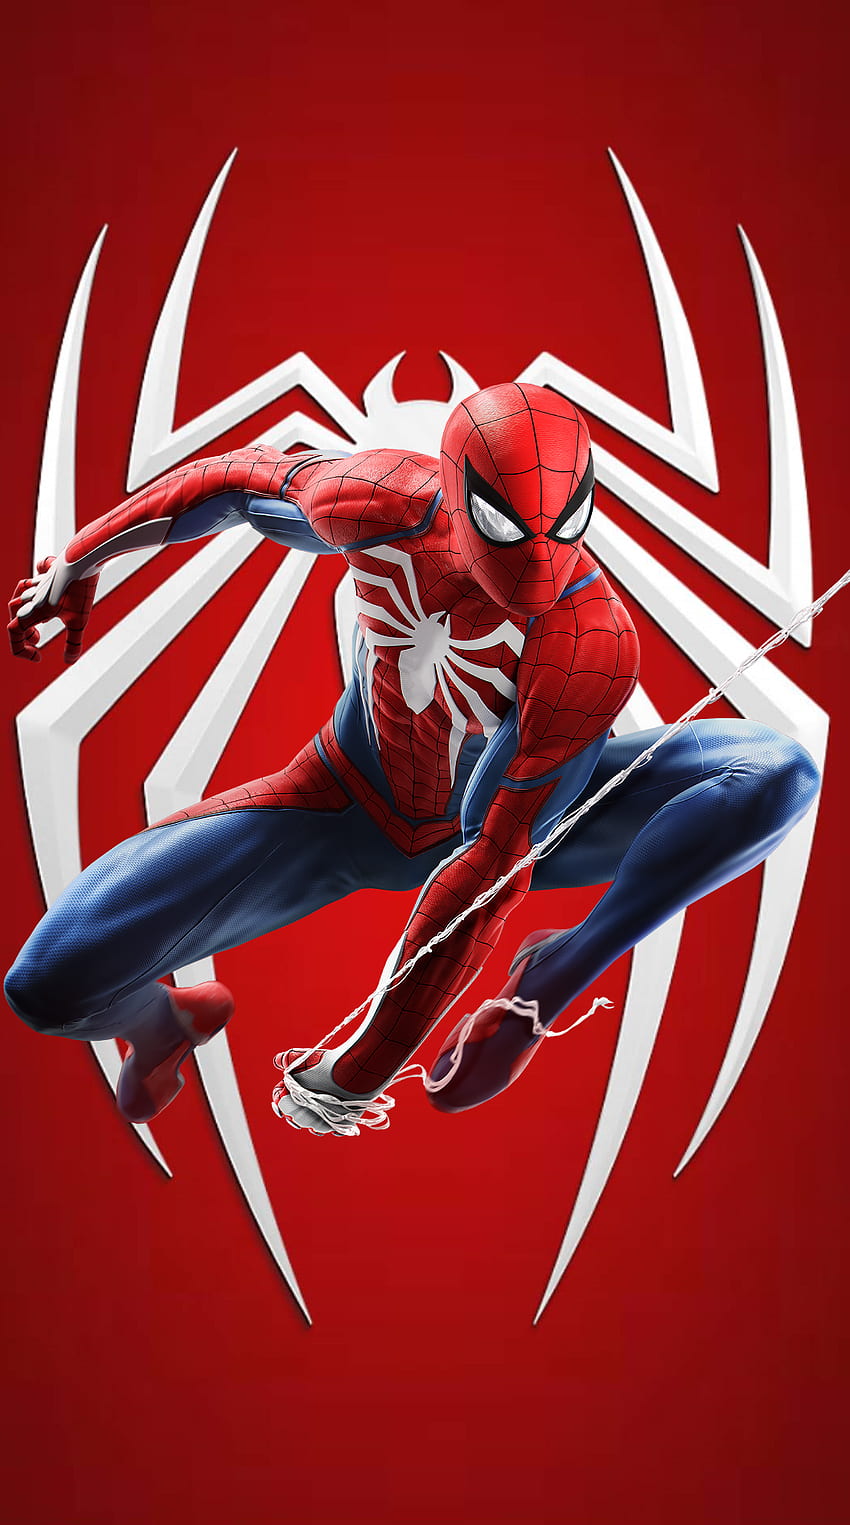 Spiderman For Android, Spider Man For Mobile HD phone wallpaper